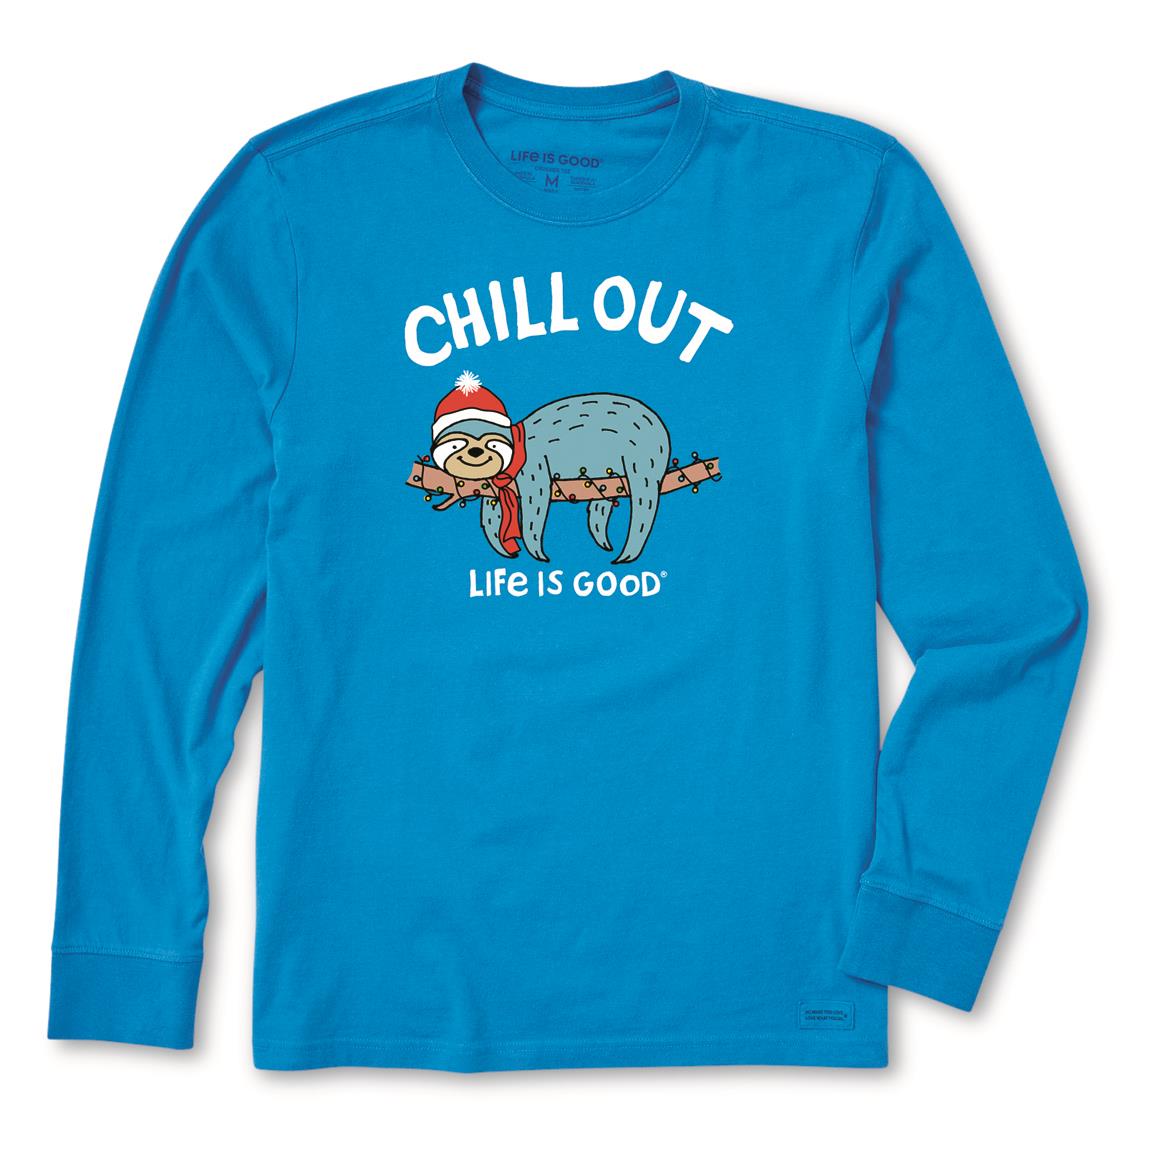 Life is Good Men's Holiday Chill Out Crusher Shirt, Royal Blue